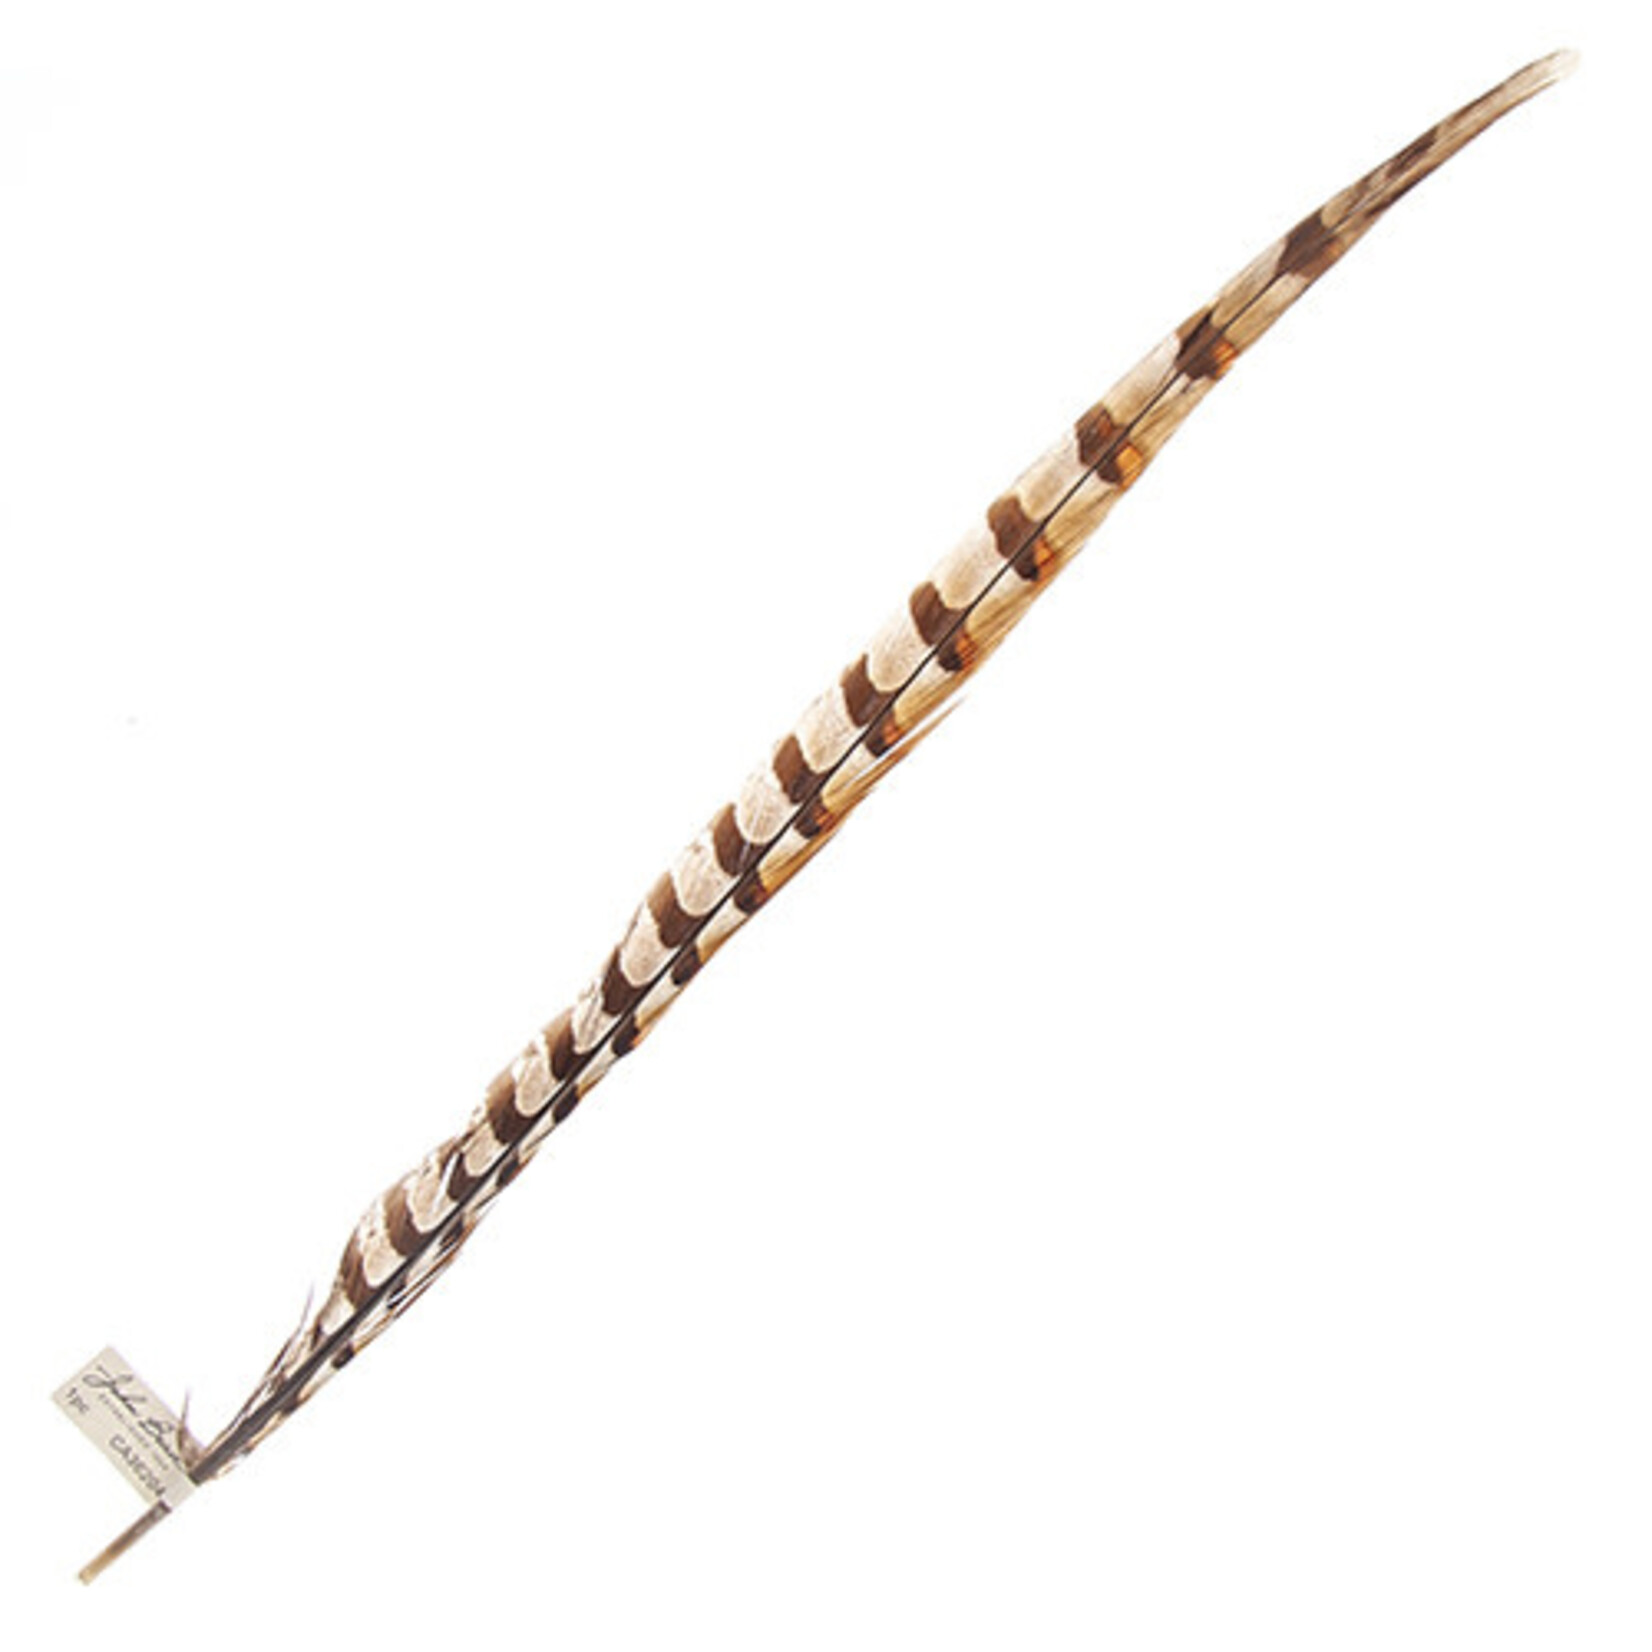 Reeves Pheasant Tail Natural 20 - 25 Inch